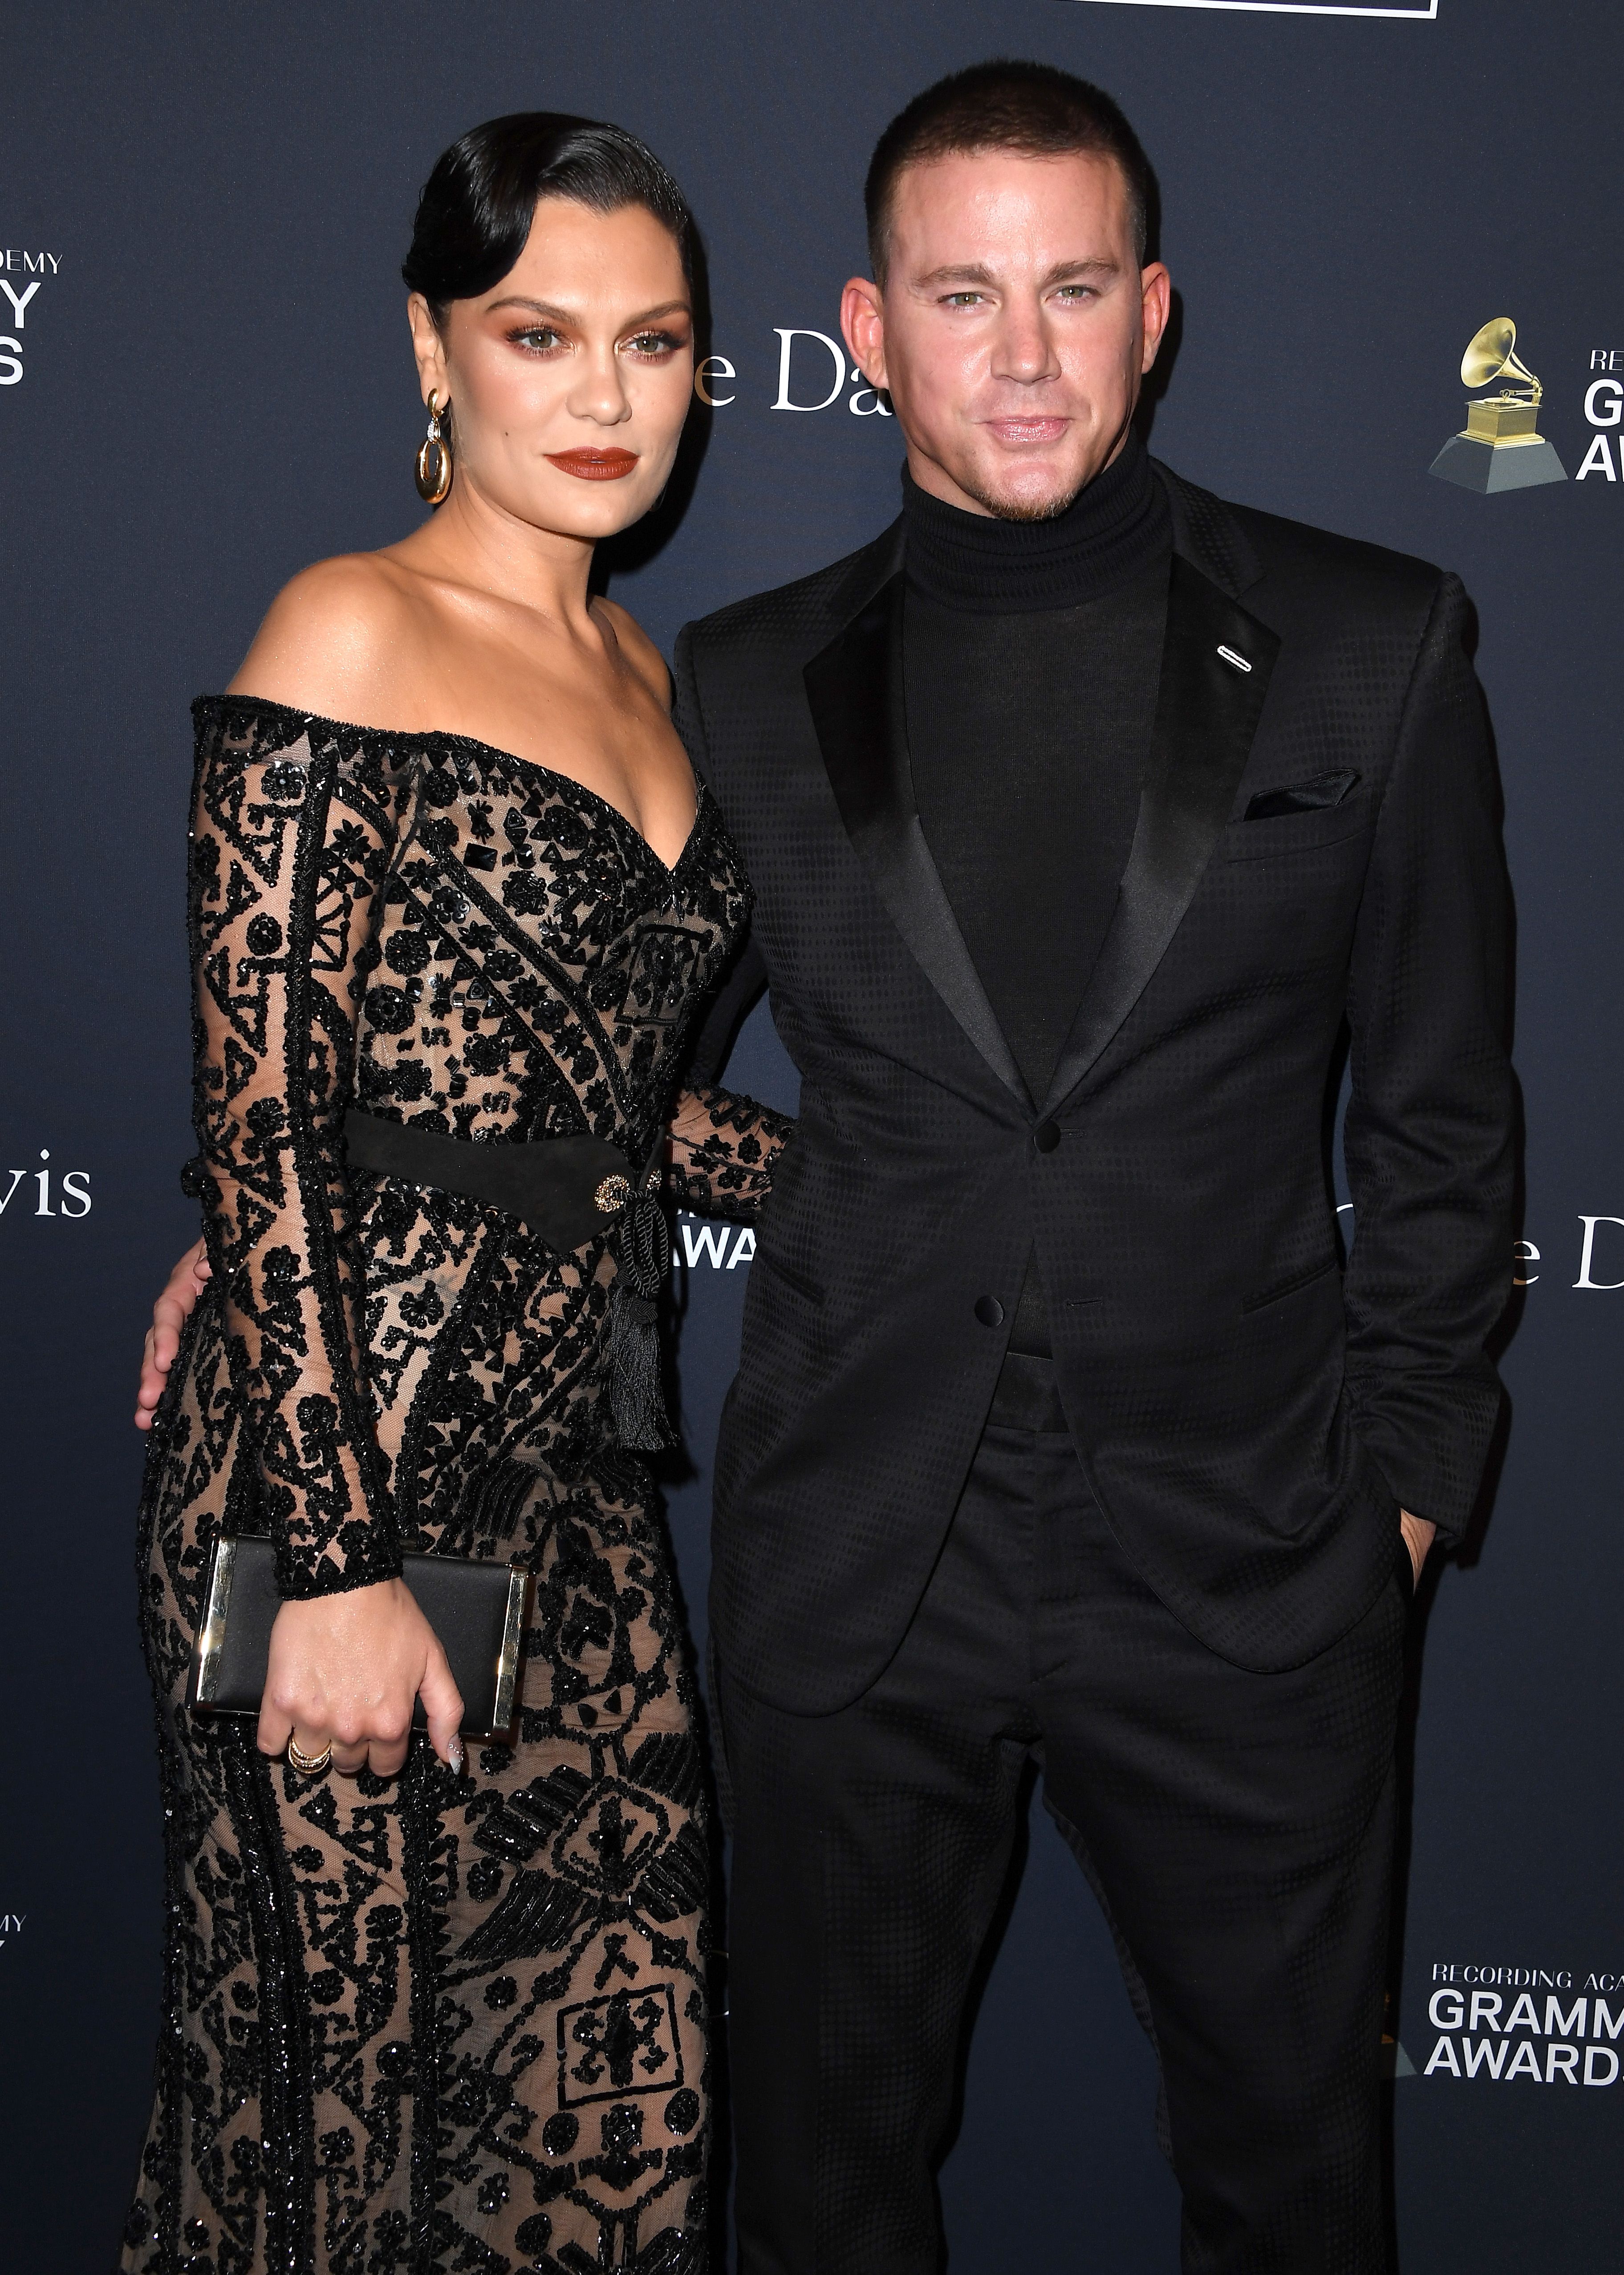 Jessie J seemingly shaded her relationship with Channing Tatum